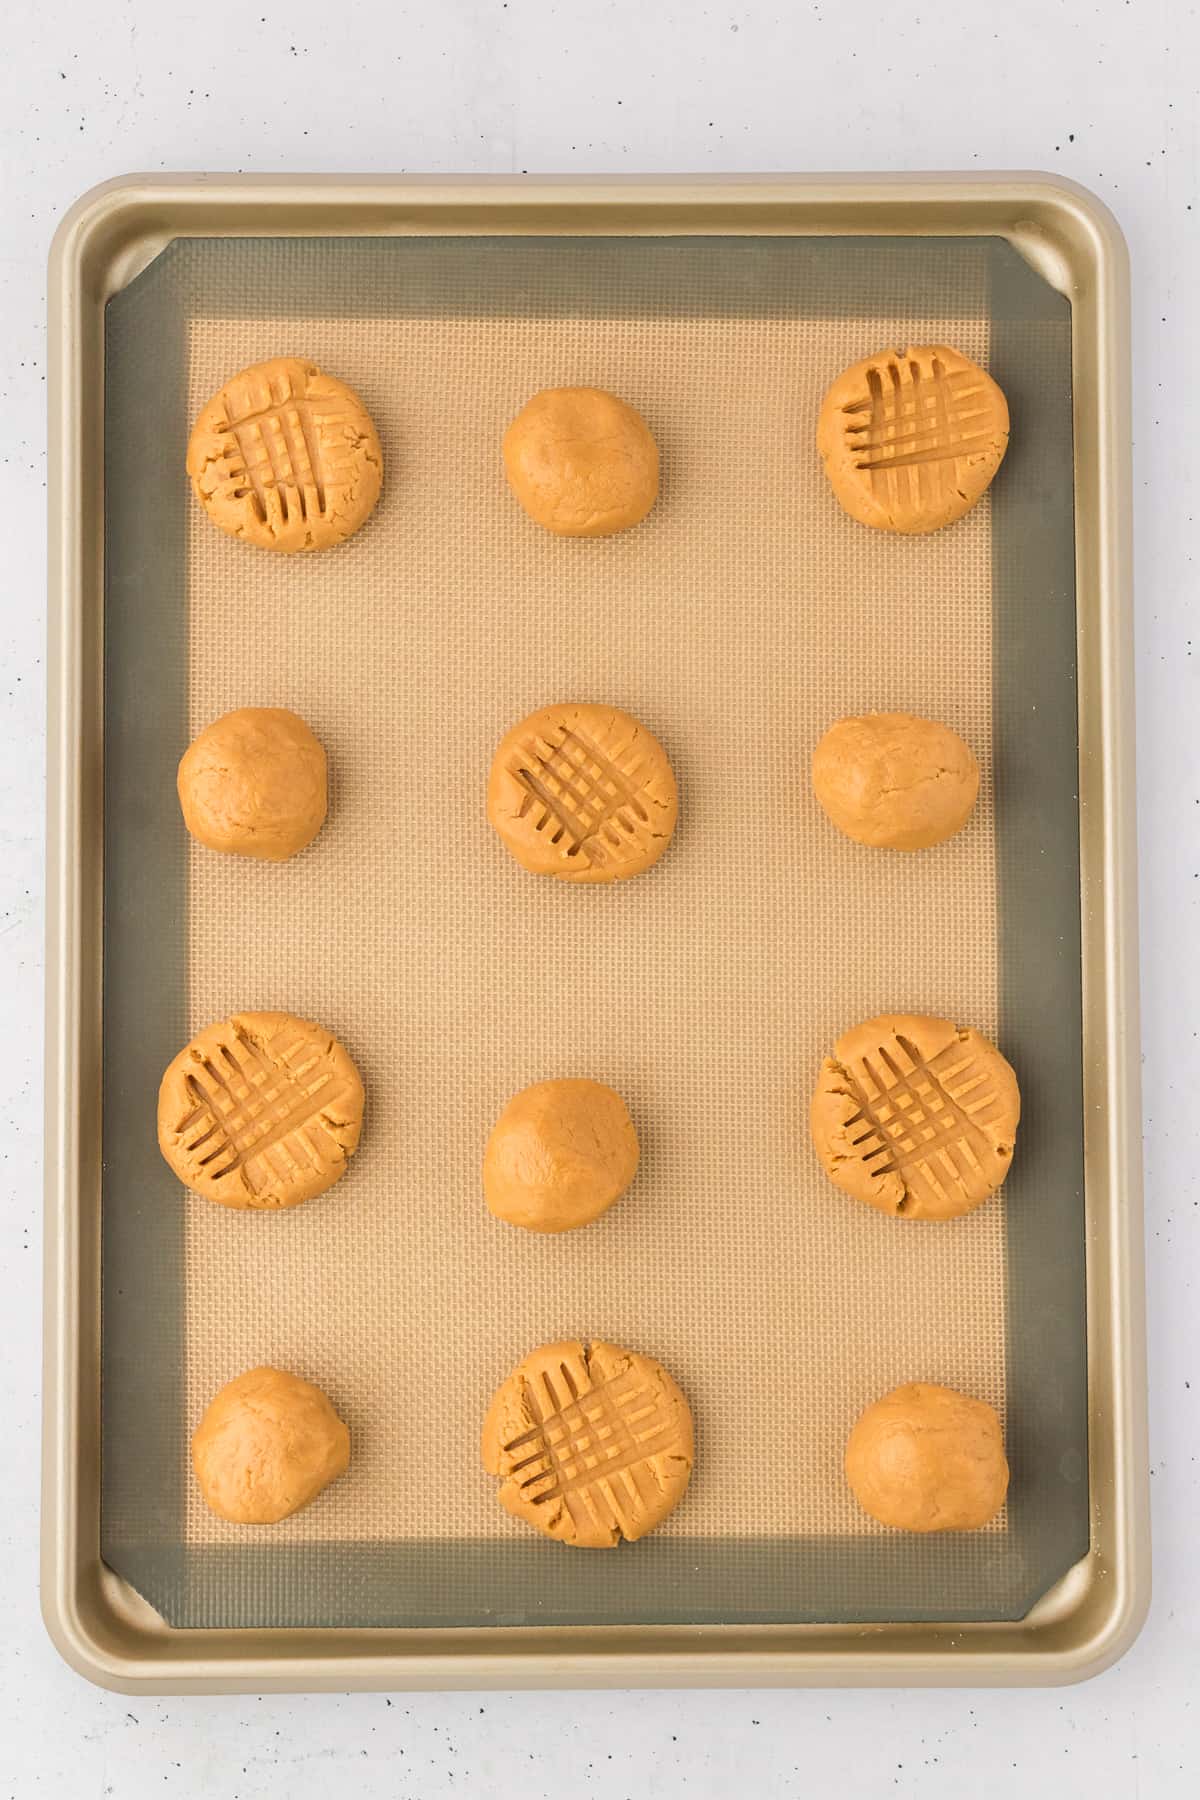 gluten free peanut butter cookie dough balls on a lined baking sheet, some pressed down into a cross hatch pattern and some still in ball form